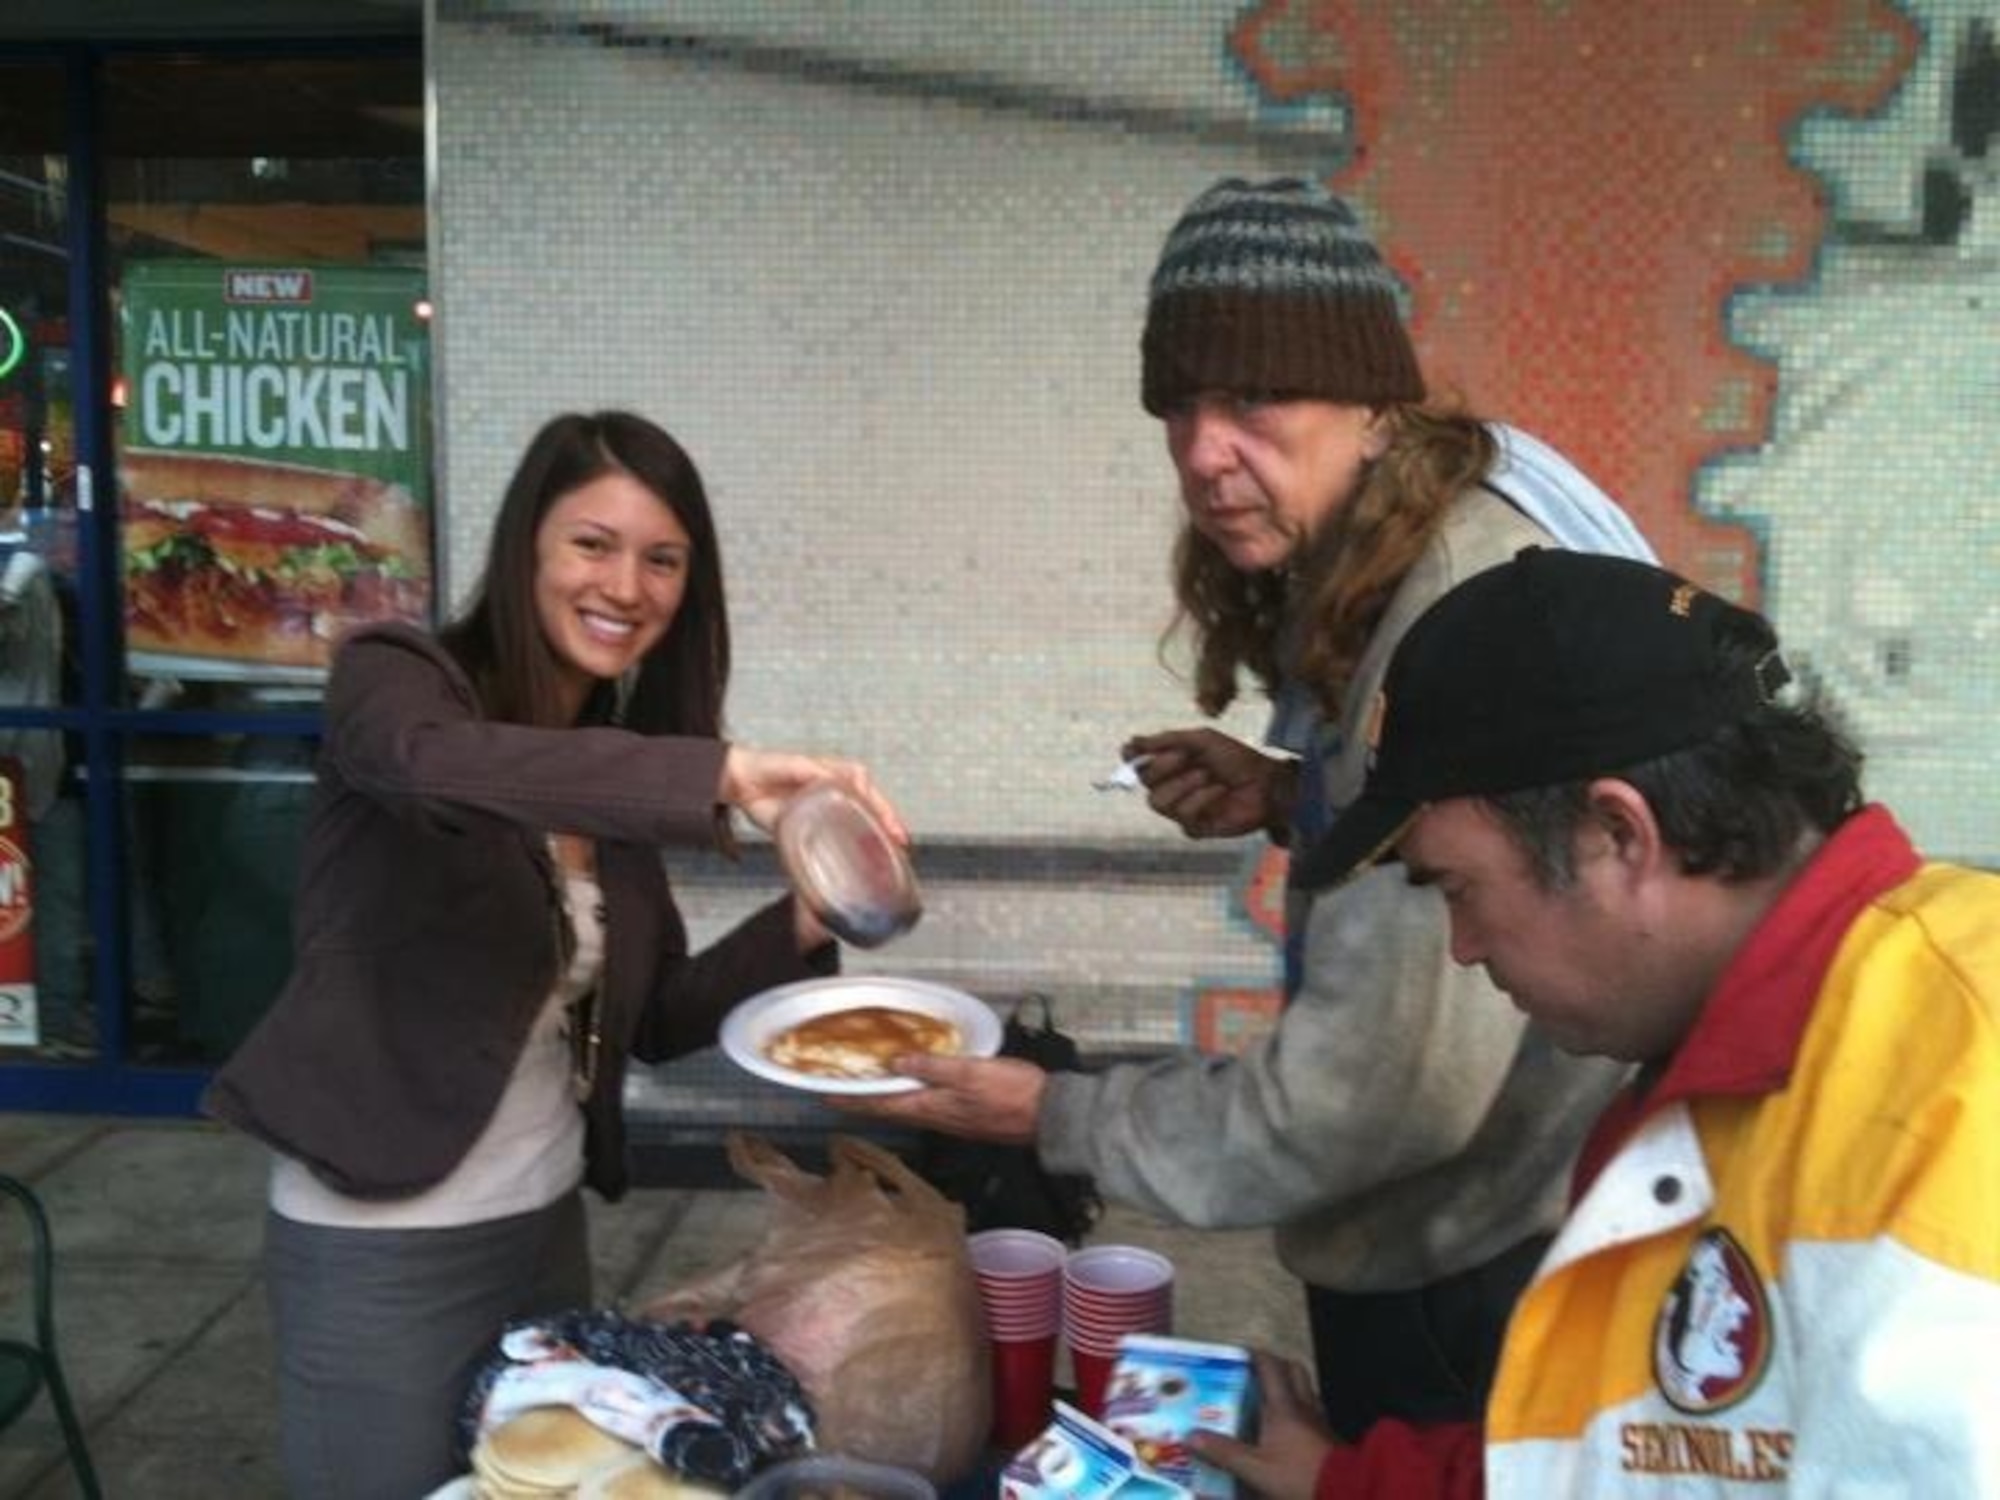 Tech. Sgt. Anna-Marie Wyant helps feed the homeless in downtown Tampa once a week. (courtesy photo)